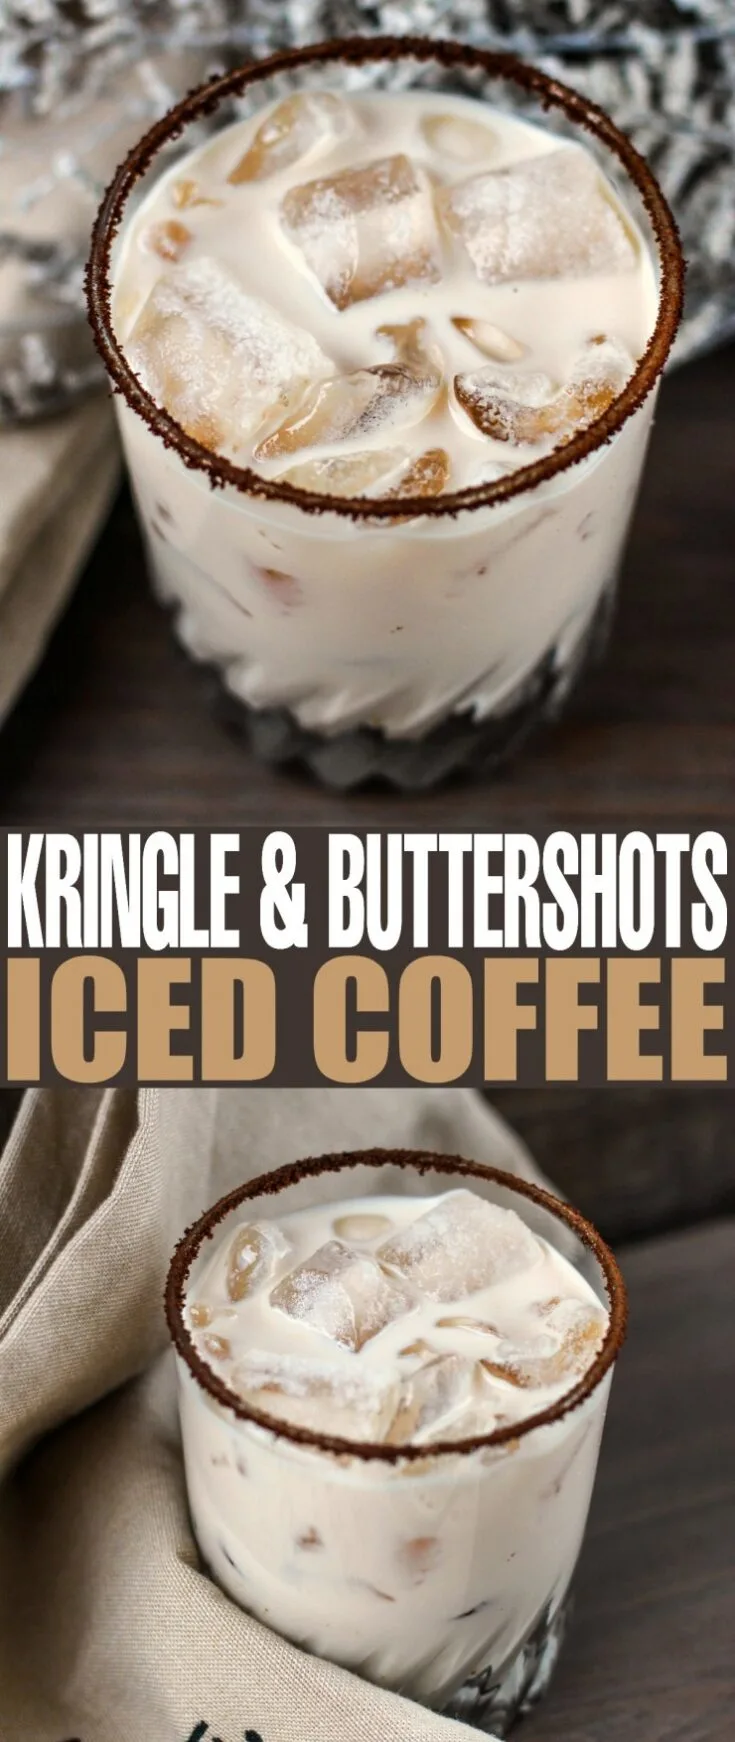 Kringle and Buttershots Iced Coffee